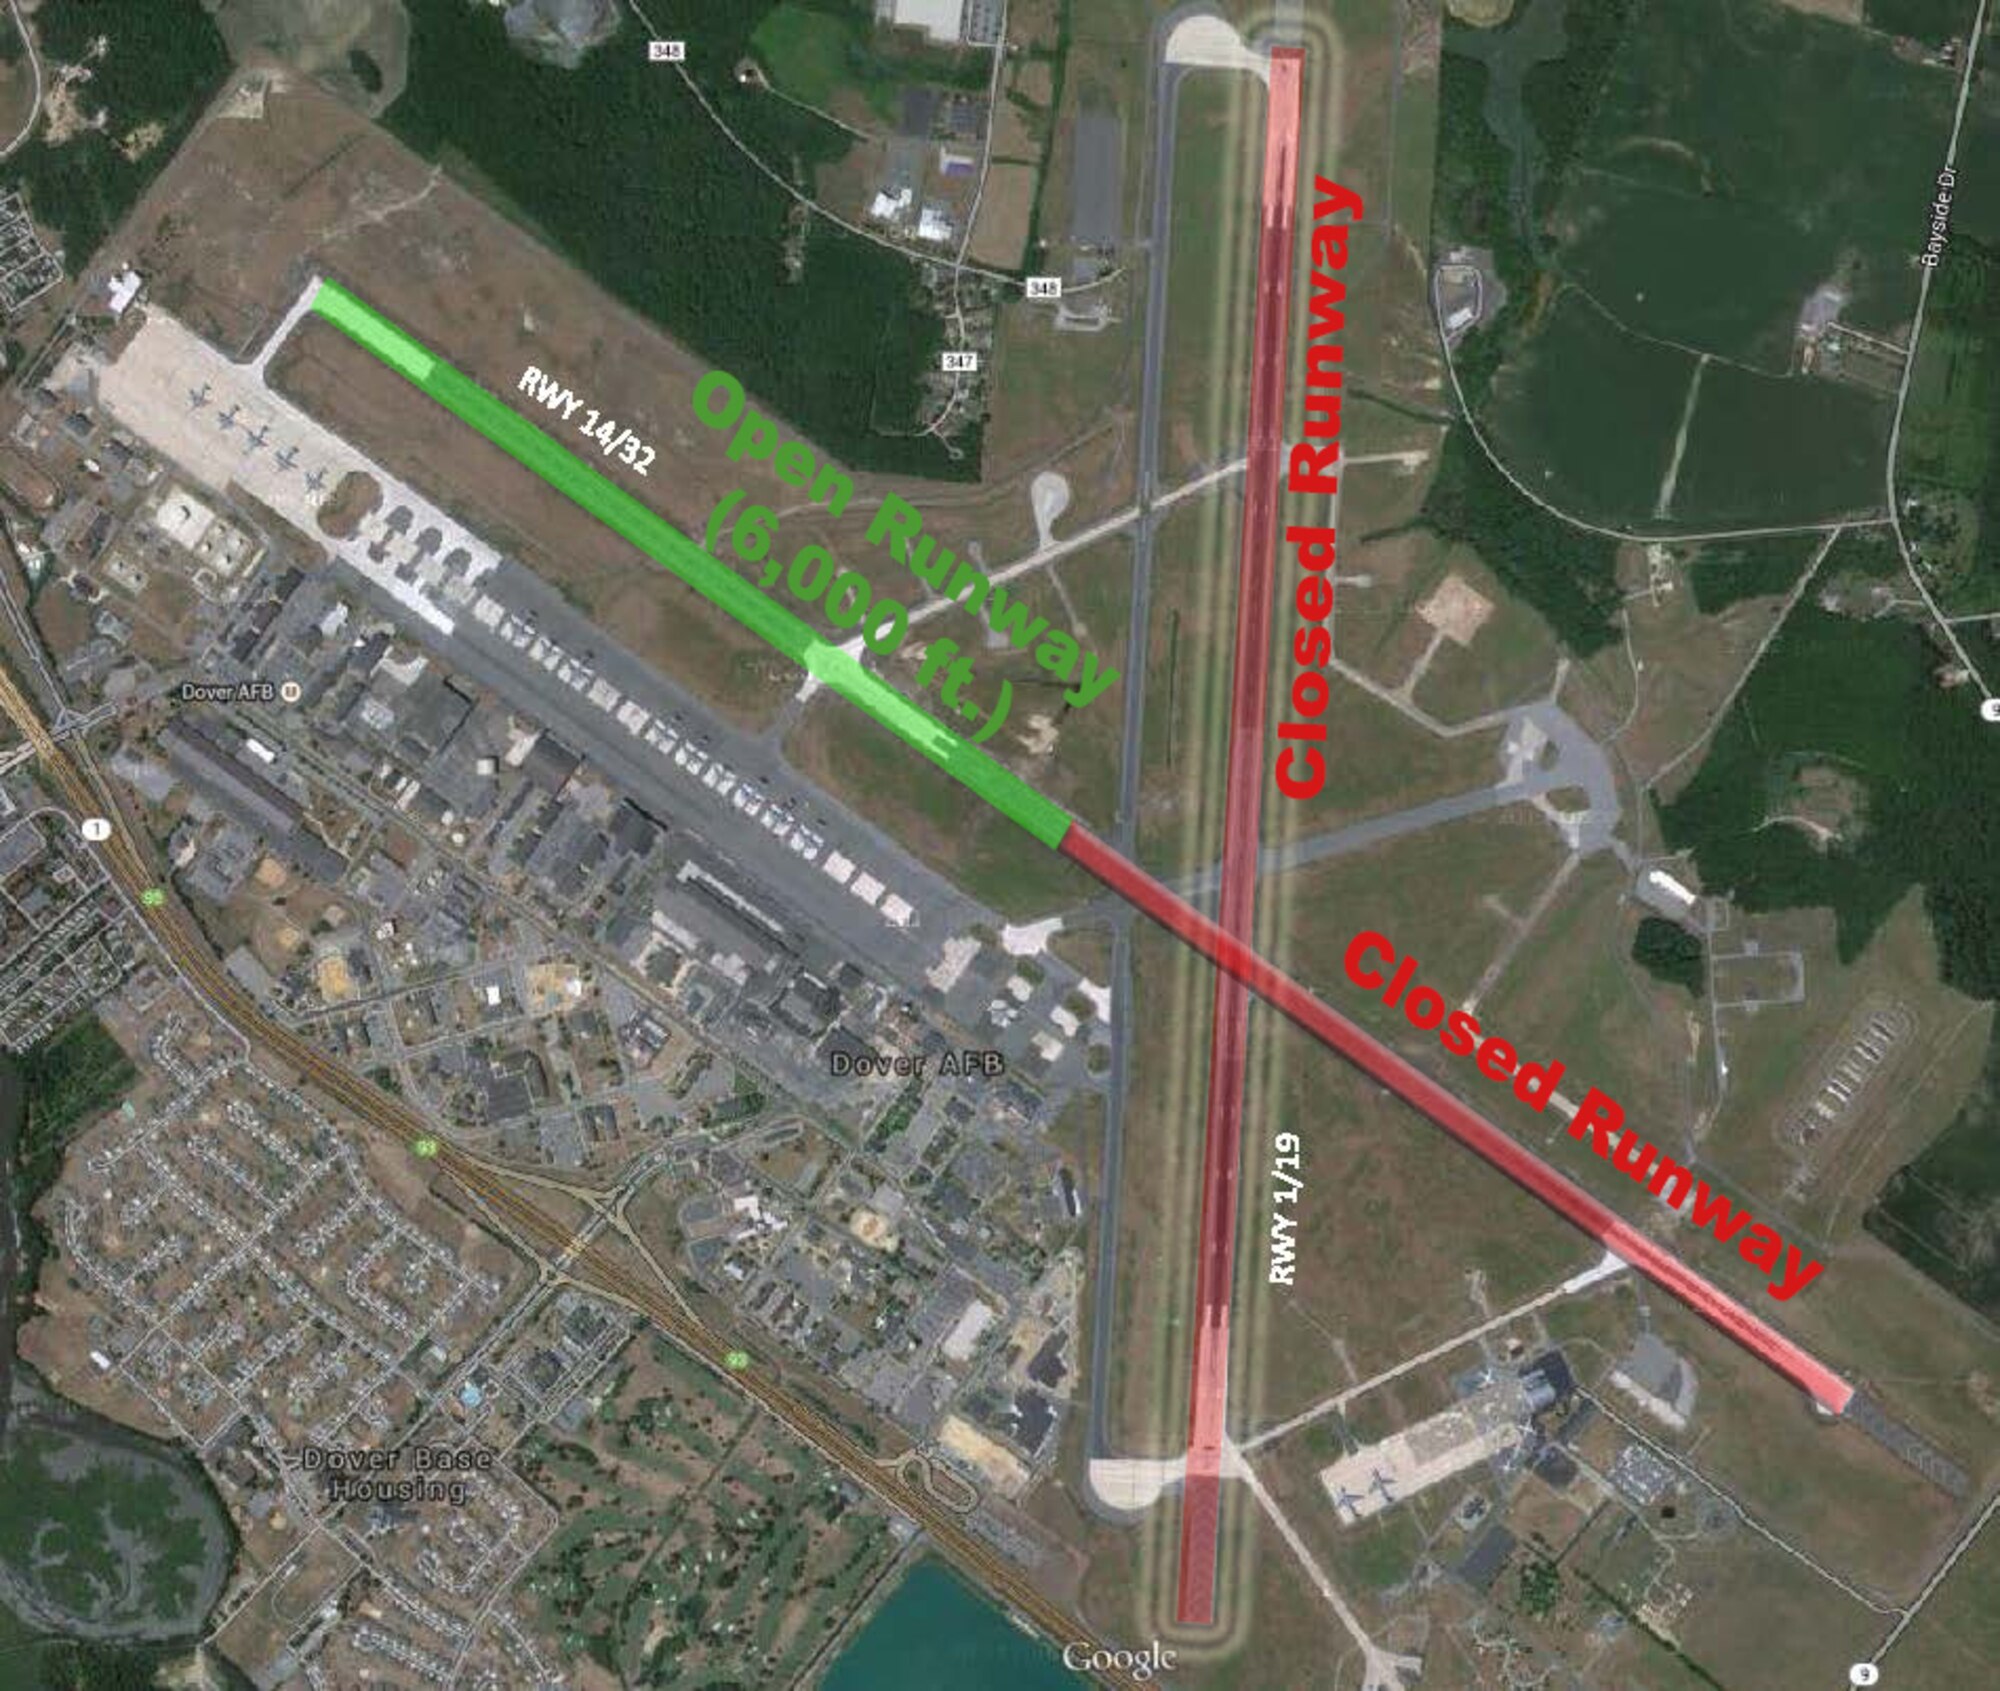 For a six month period, Dover Air Force Base, Del., will operate with a shortened runway due to the ongoing runway construction project. 